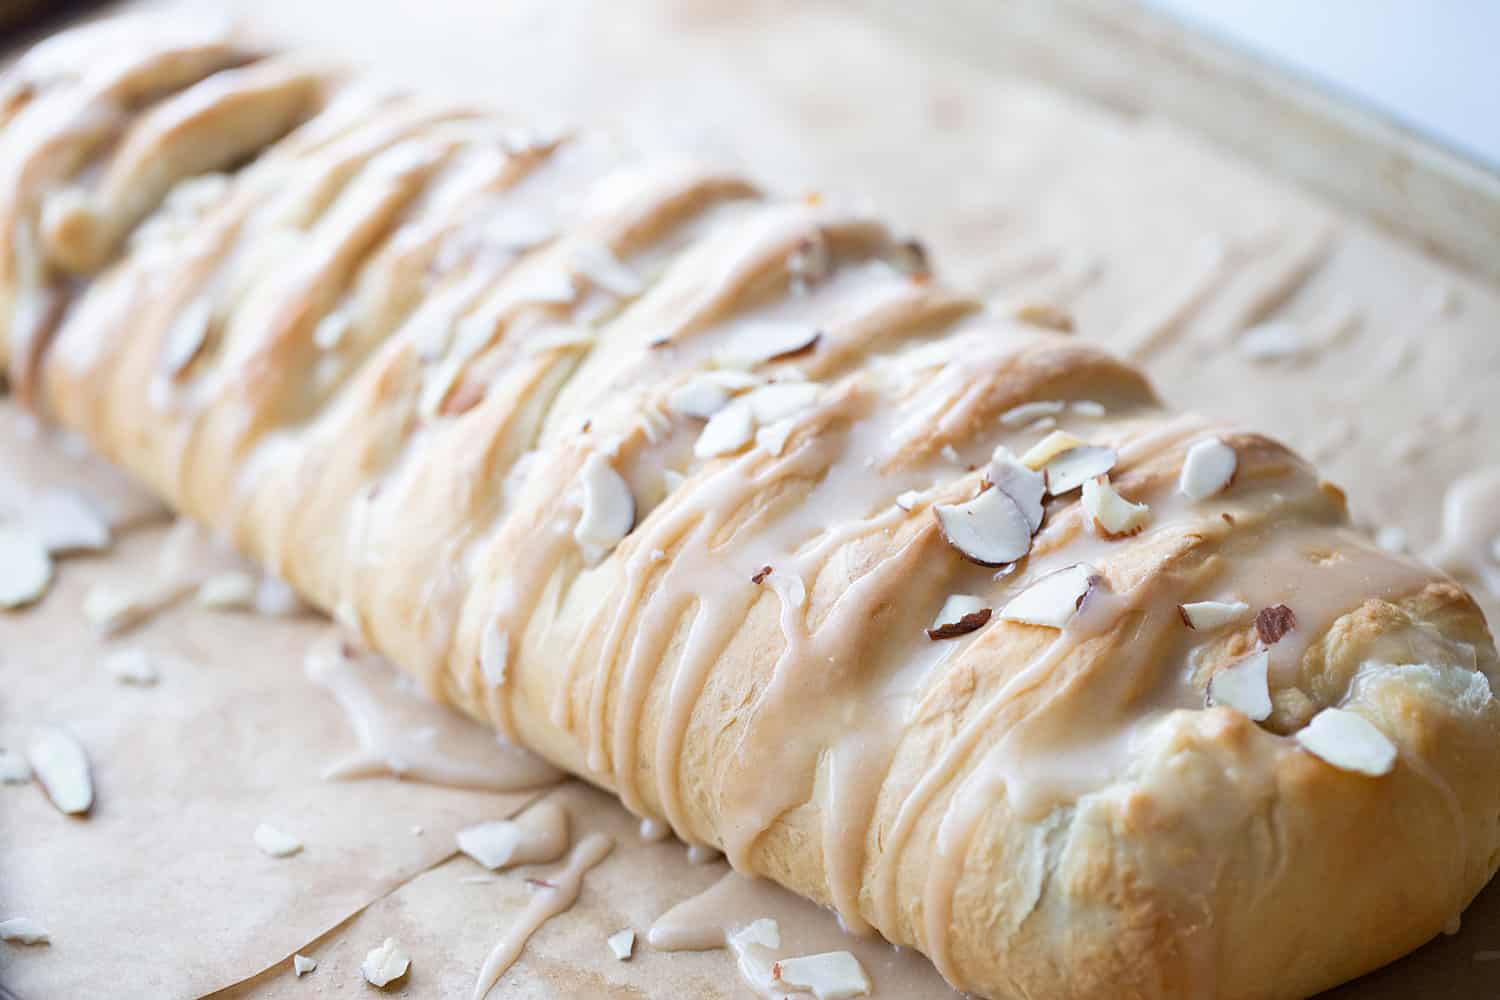 Easy Almond Braid - This easy almond braid is simple *and* totally scrumptious. Good luck not eating the entire beautifully braided dessert in one sitting! #halfscratched #dessert #brunch #almond #almonddessert #baking #almondbraid #braideddessert #recipe #dessertrecipe